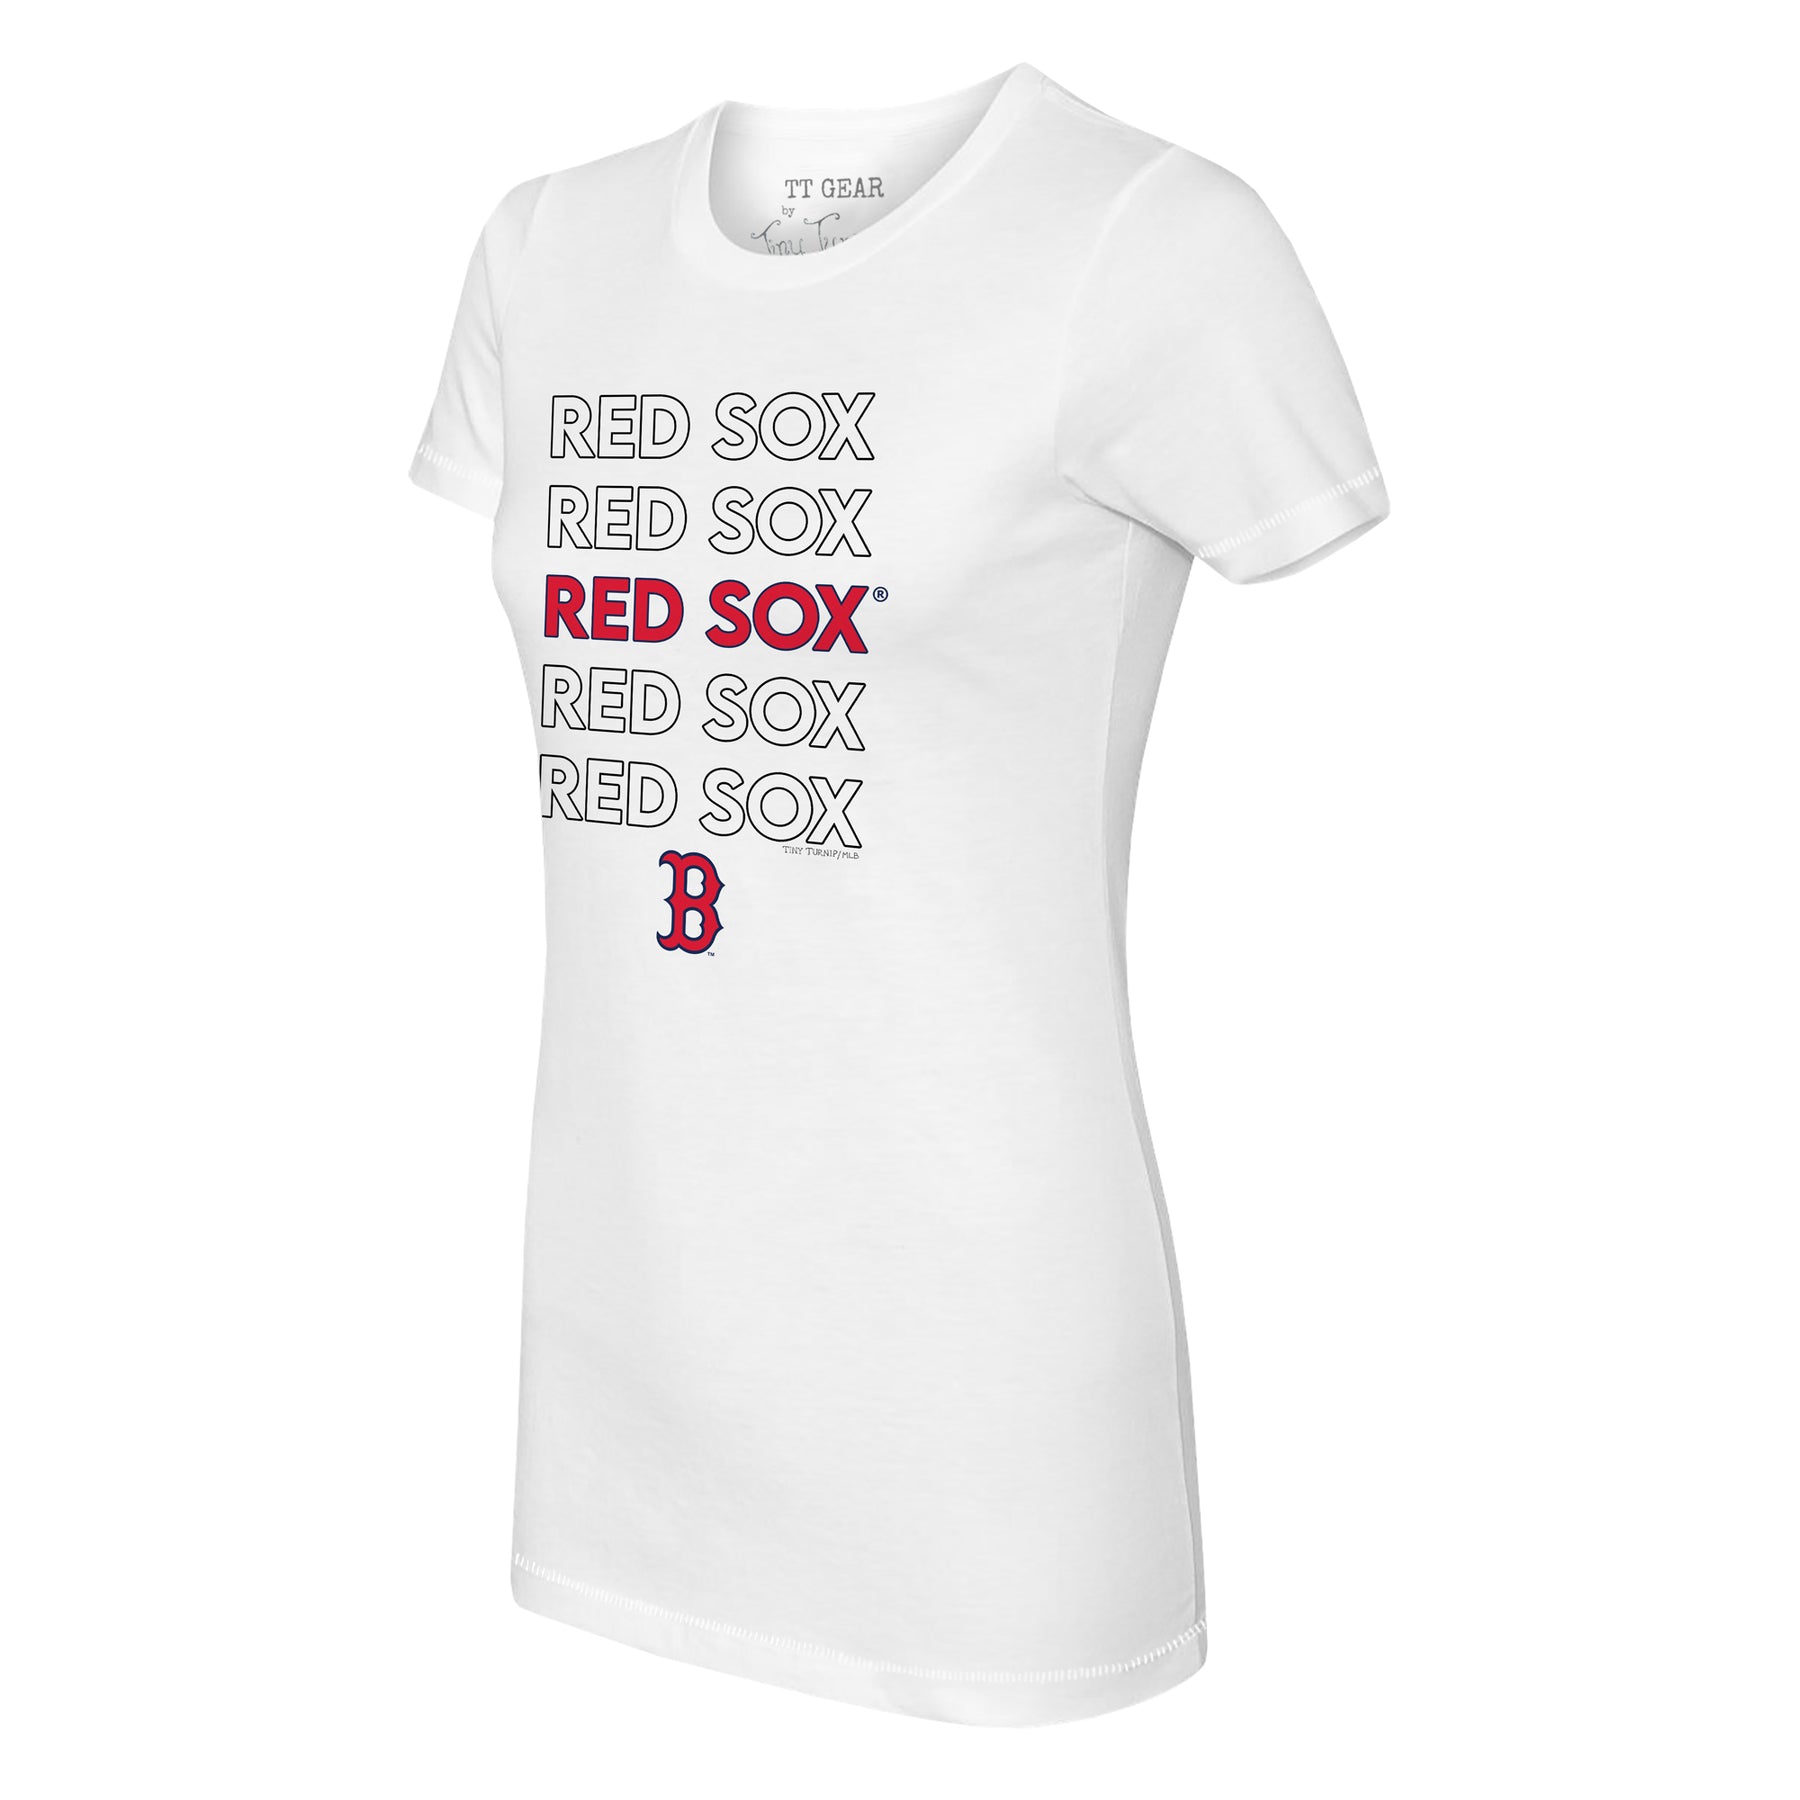 Tiny Turnip Boston Red Sox Stacked Tee Shirt Women's Large / Red